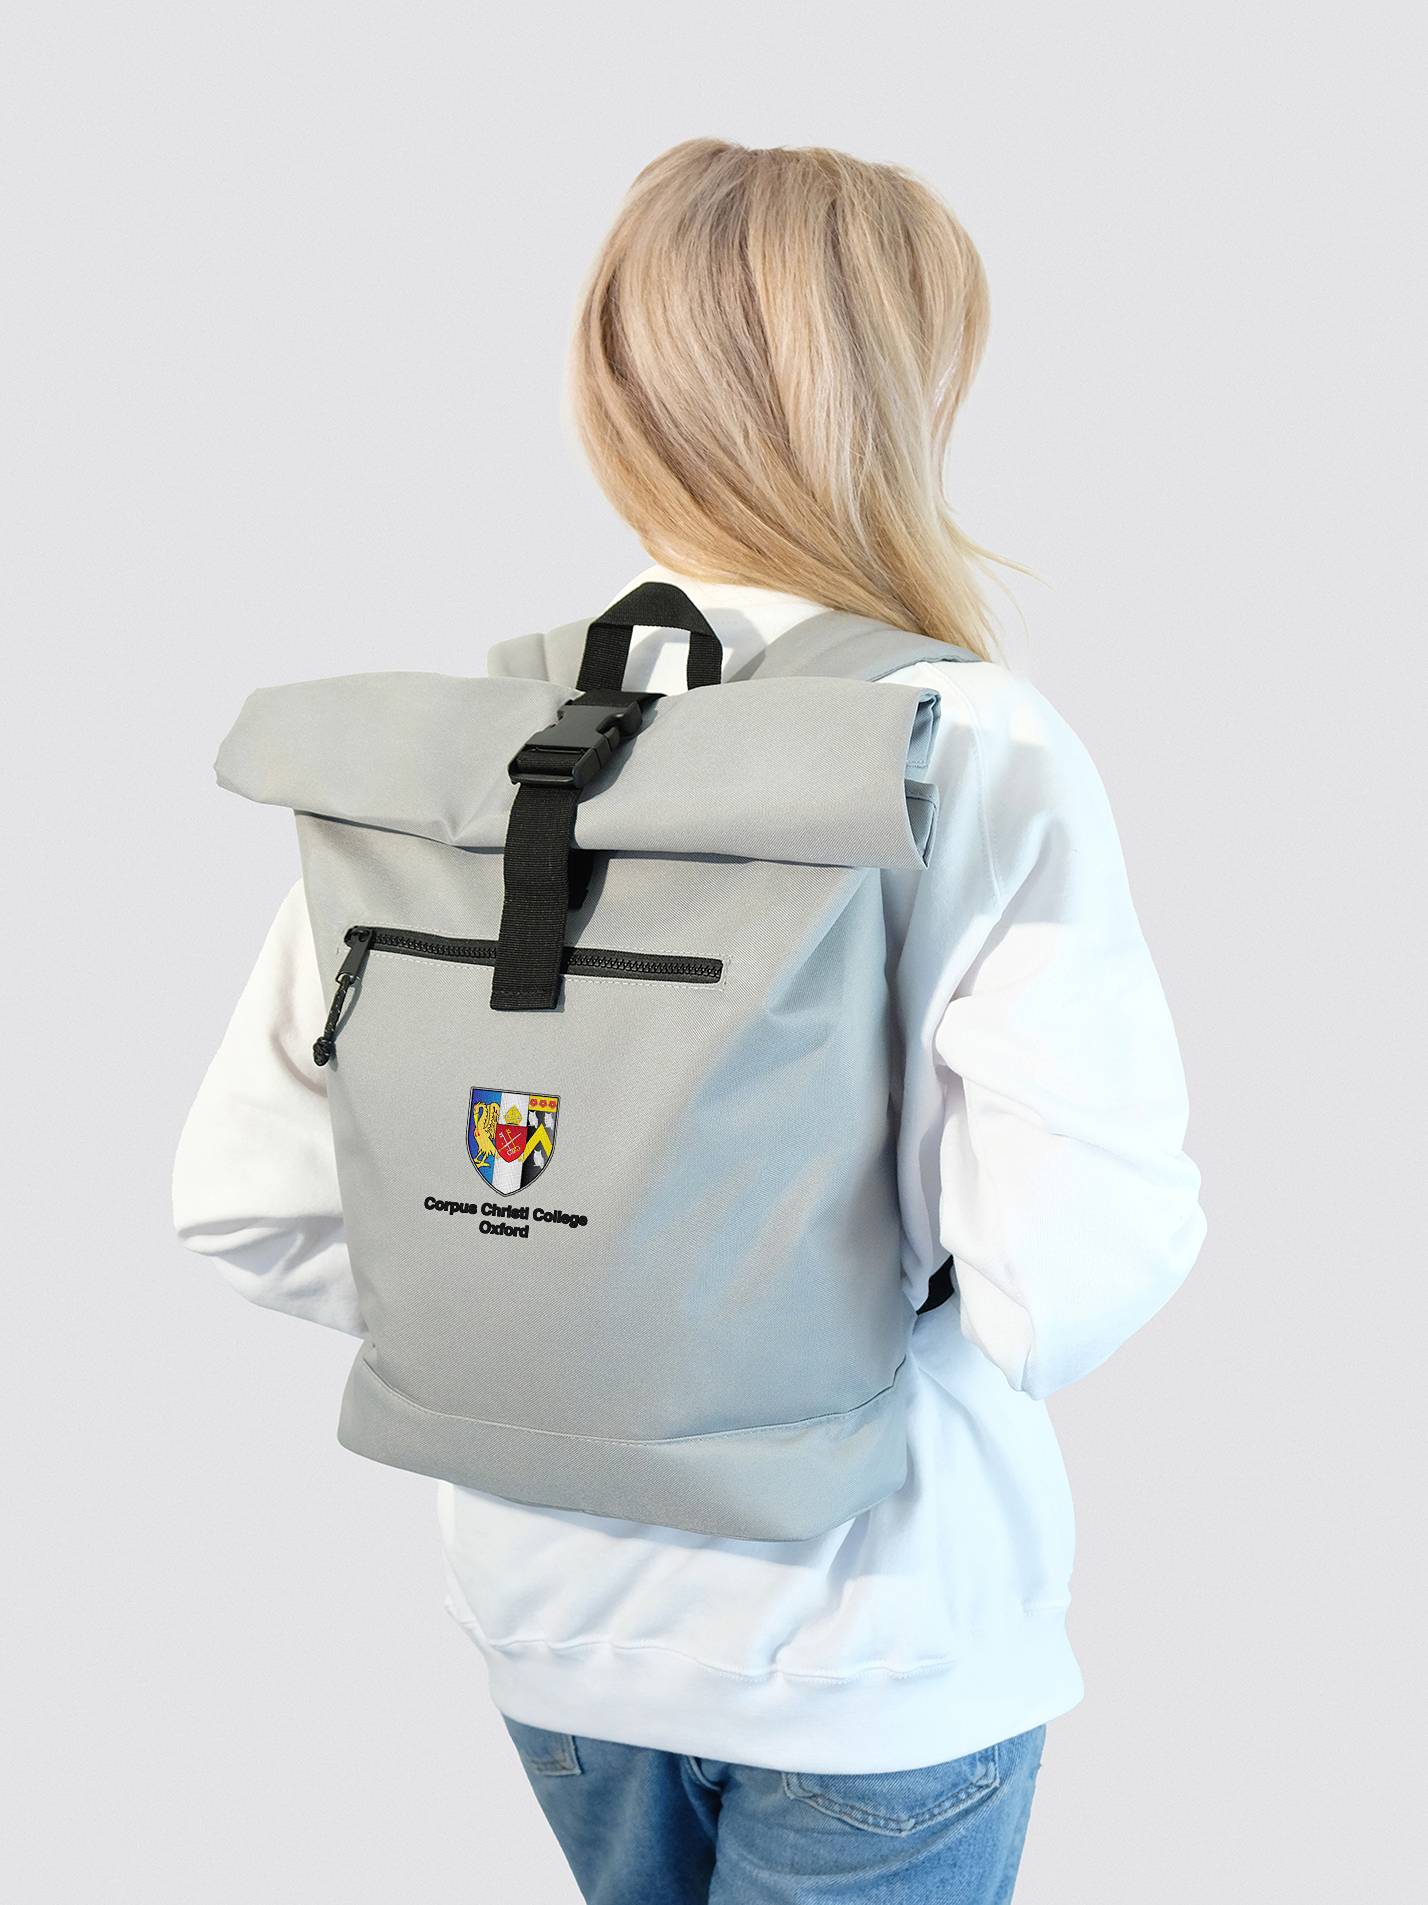 Corpus Christi College Oxford Roll Top Backpack